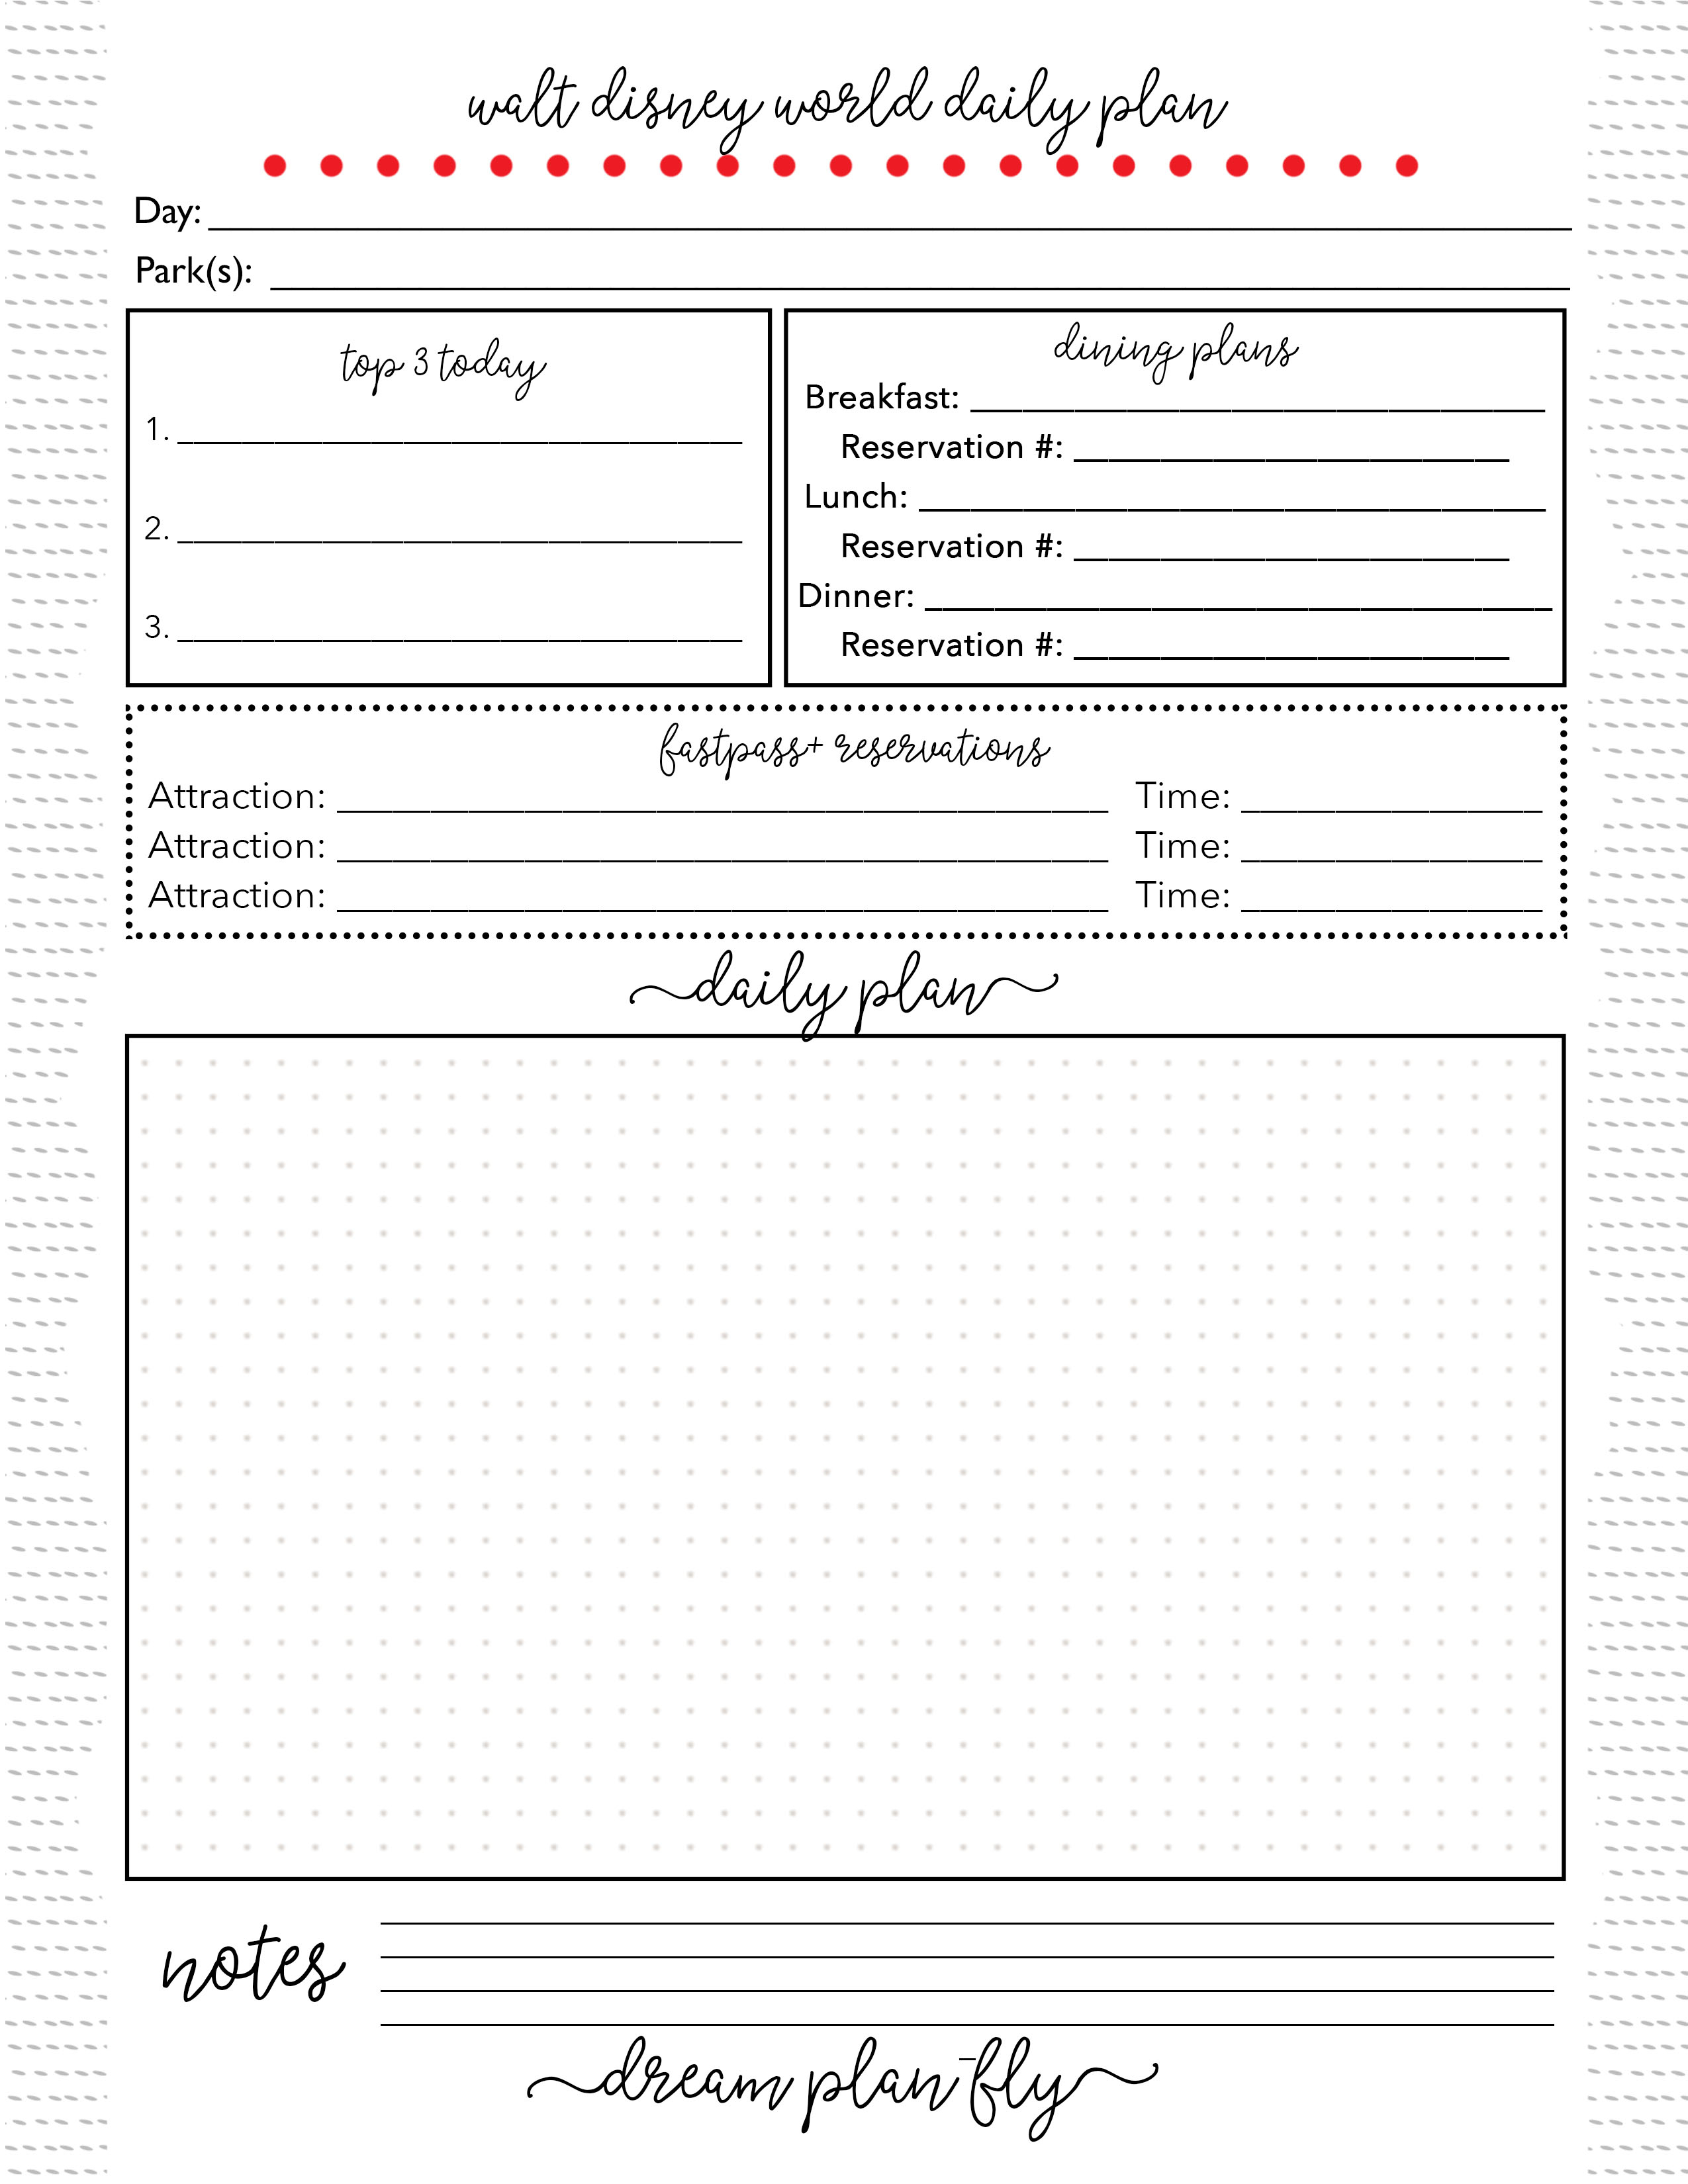 Free Printable Daily Planner For Walt Disney World  Dream intended for Disney Vacation Planner Template